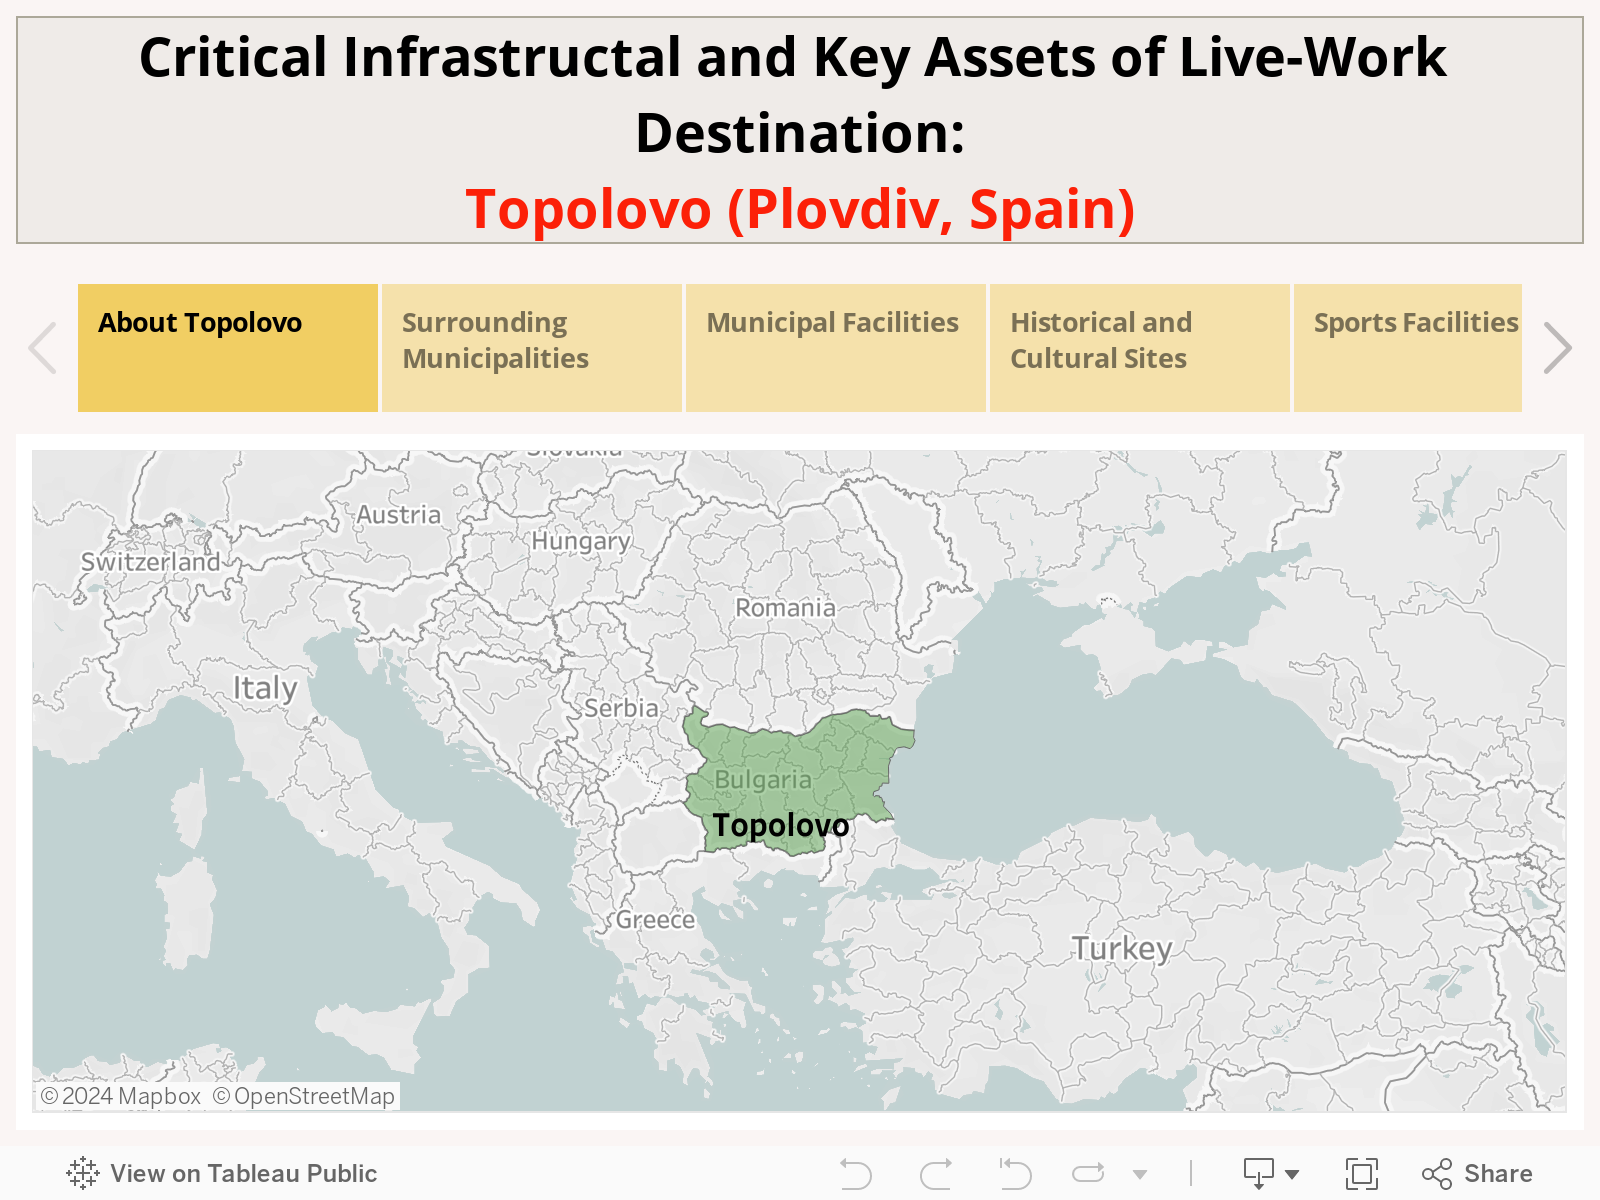 Critical Infrastructal and Key Assets of Live-Work Destination:Topolovo (Plovdiv, Spain) 